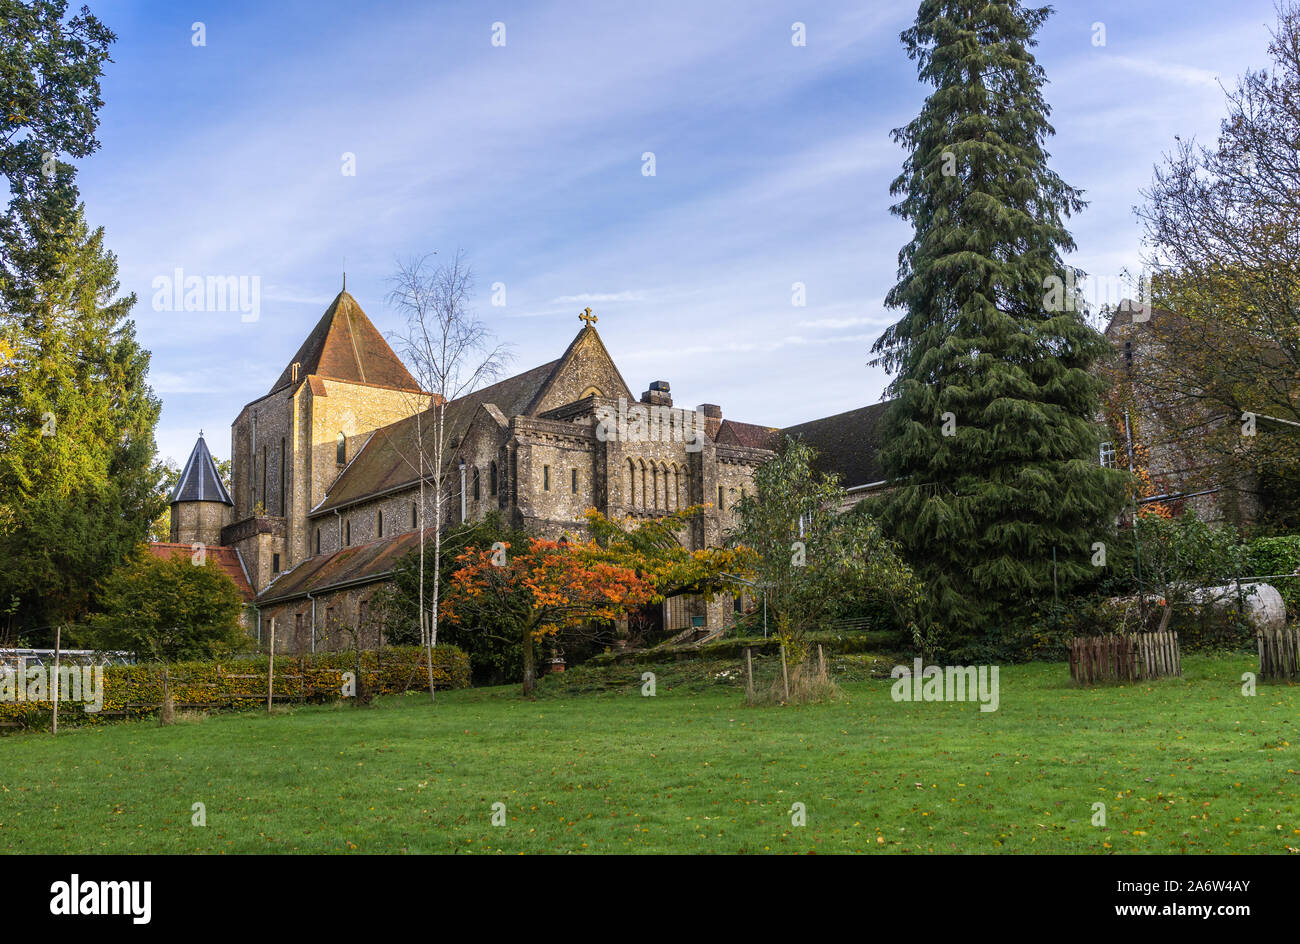 Alton Abbey an old Anglican Benedictine Monastery in Hampshire during autumn, England, UK Stock Photo